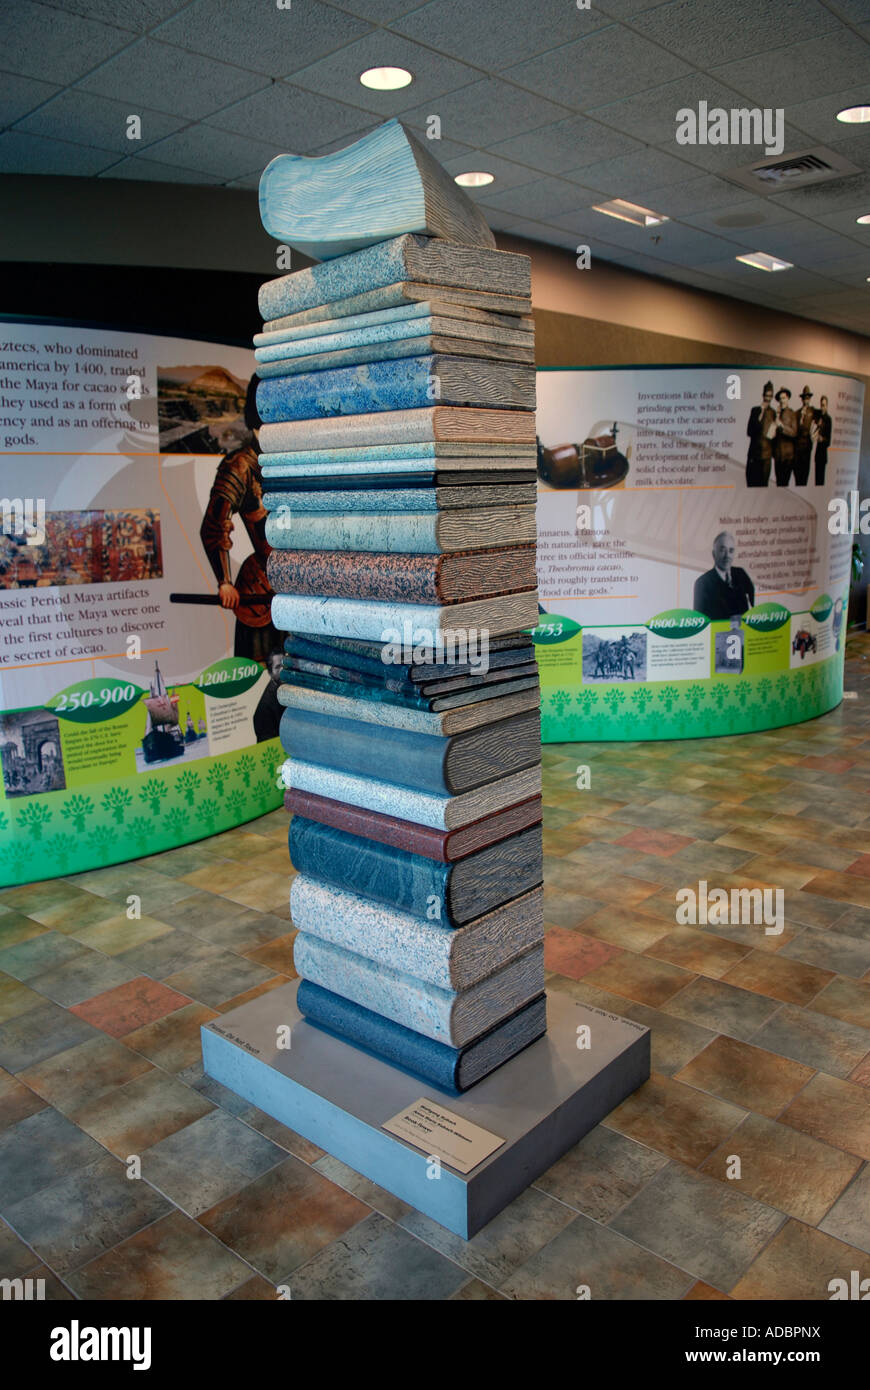 Book Tower by Wolfgang and Anna Maria Kuback 1998 at the Frederik Meijer Gardens and Sculpture Park in Grand Rapids Michigan MI Stock Photo